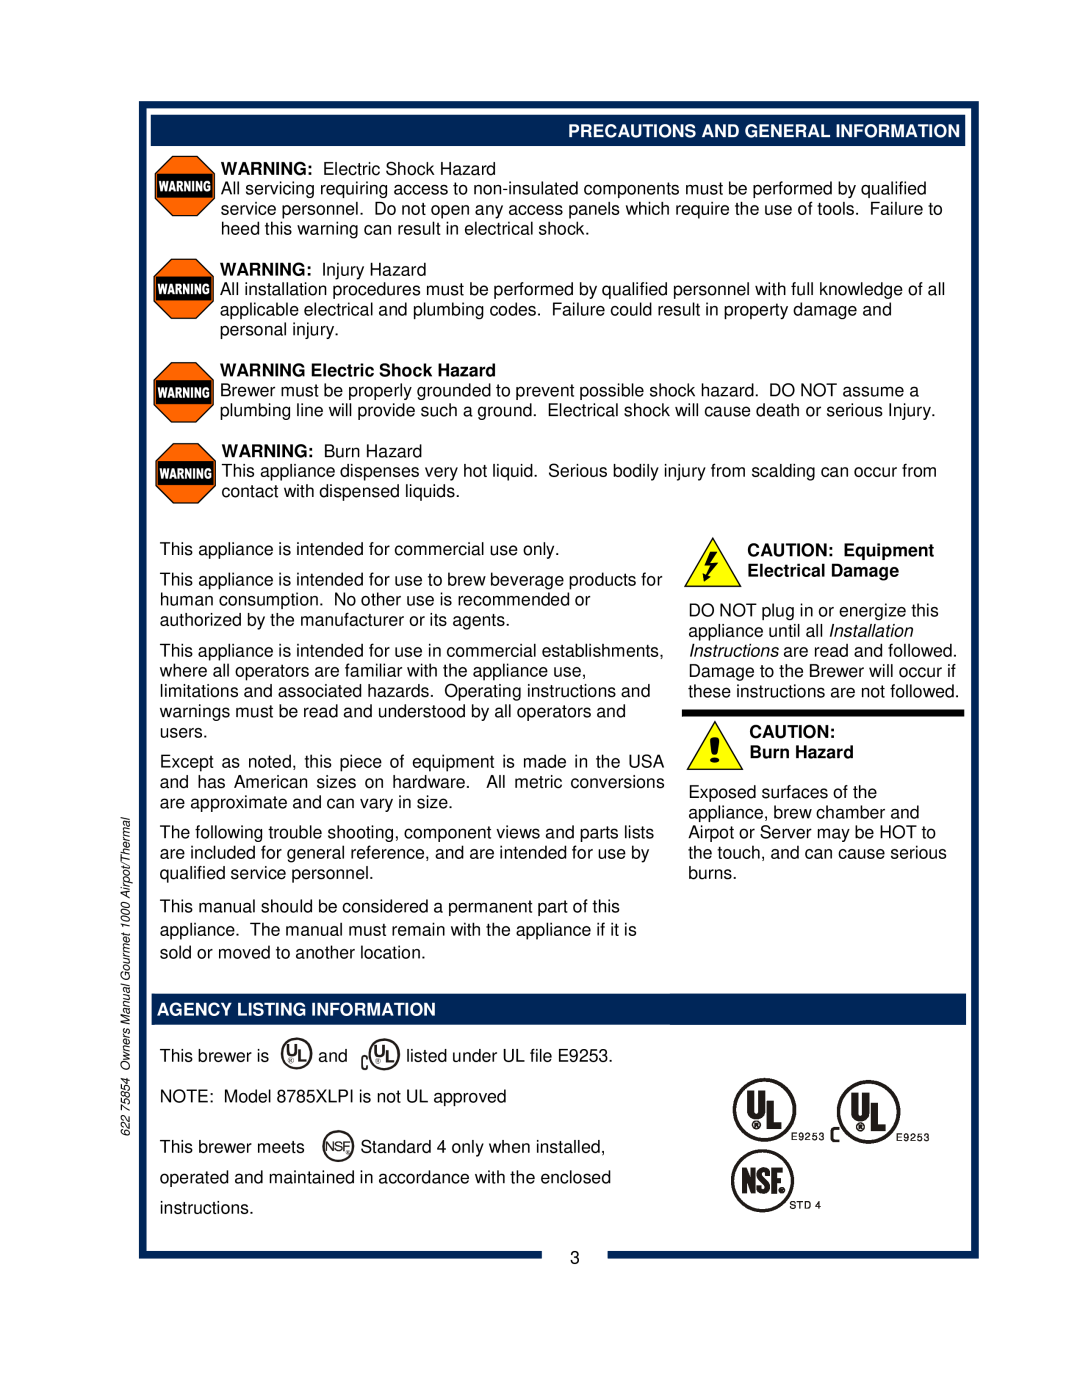 Bloomfield 8788 Precautions And General Information, WARNING Electric Shock Hazard, CAUTION Equipment Electrical Damage 